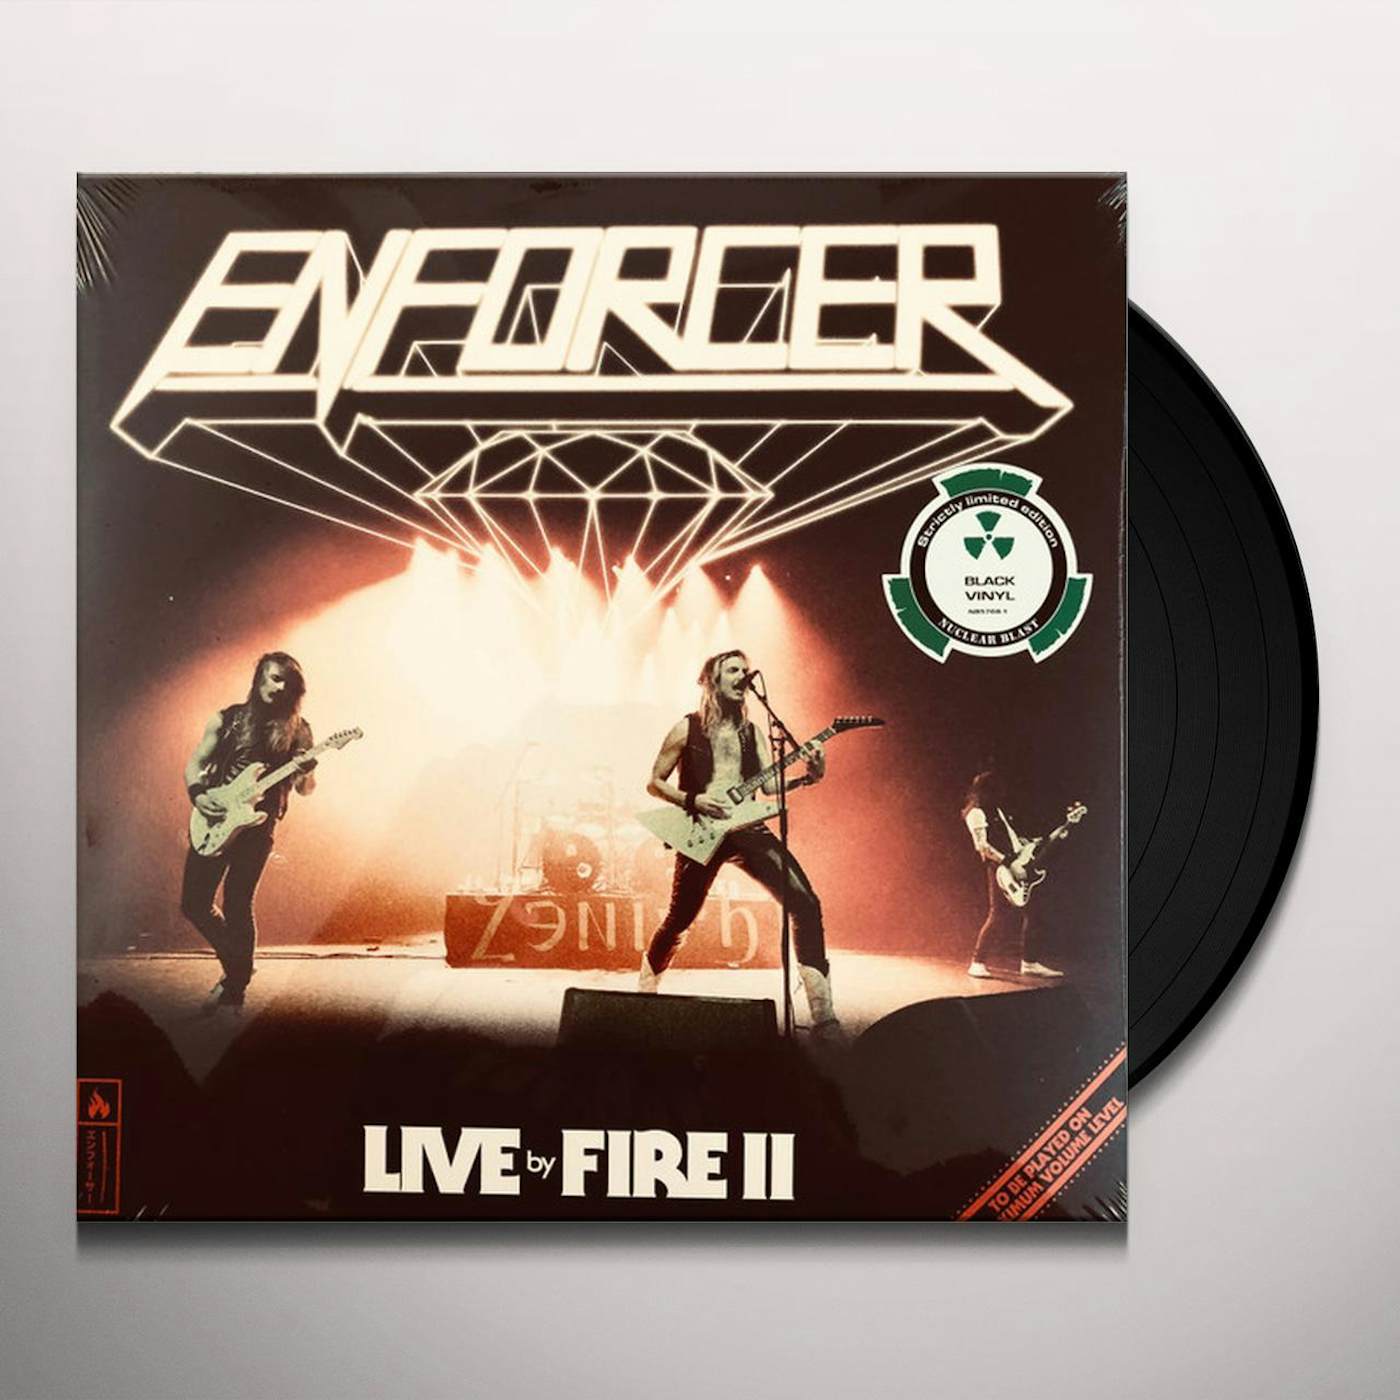 Unknown LIVE BY FIRE II Vinyl Record